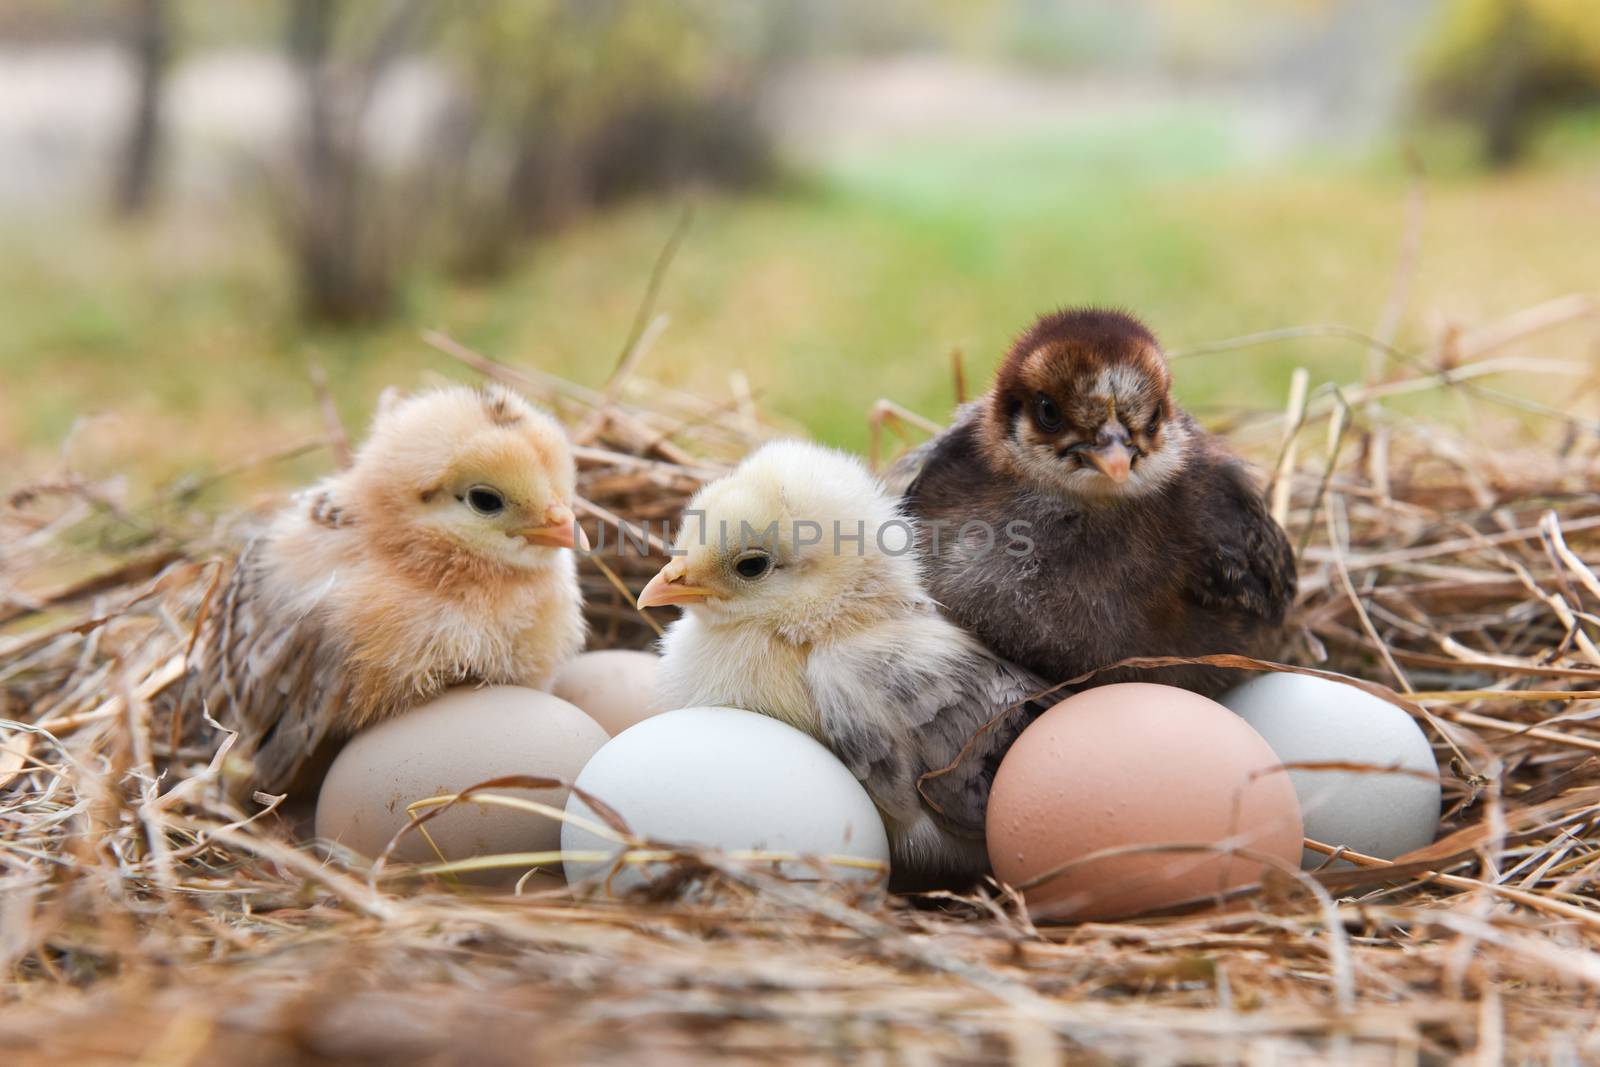 chicks in the hay with eggs on Easter holidays by infinityyy